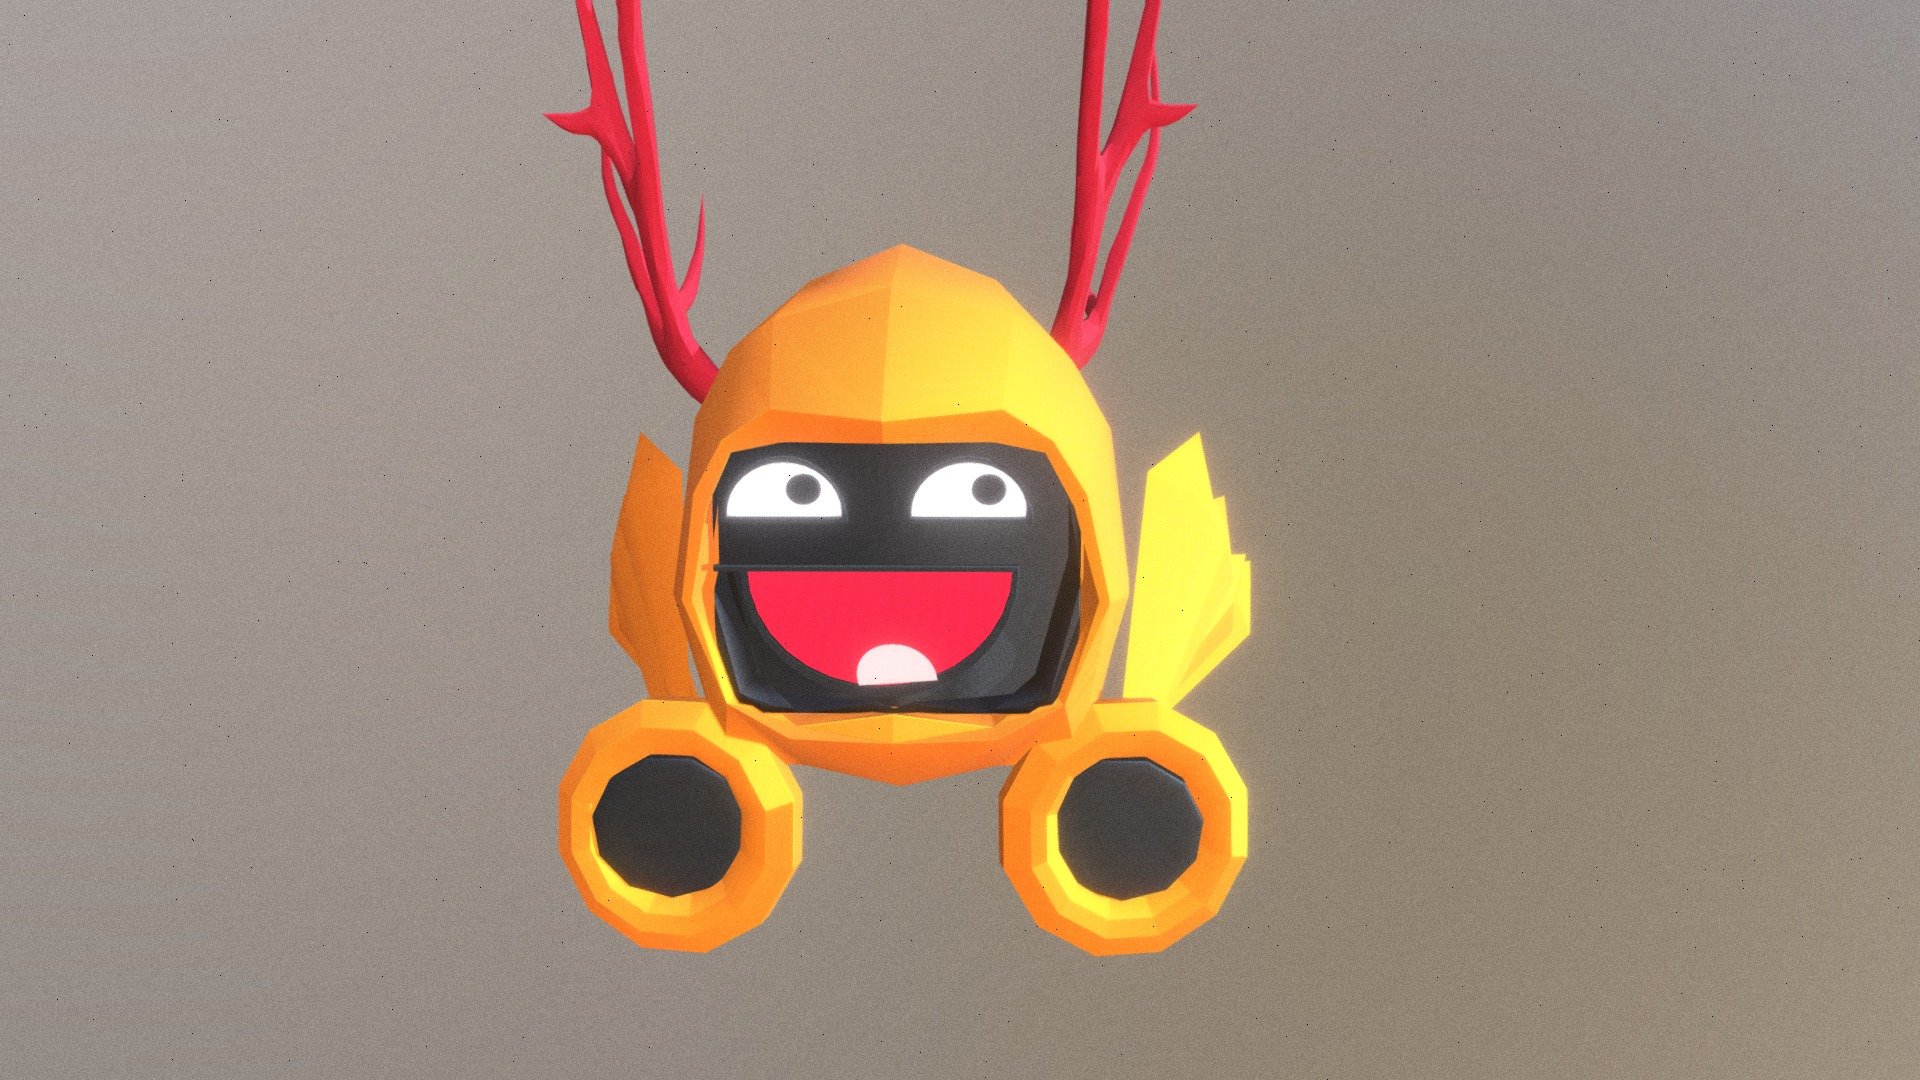 New ROBLOX dominus? - General - Cookie Tech